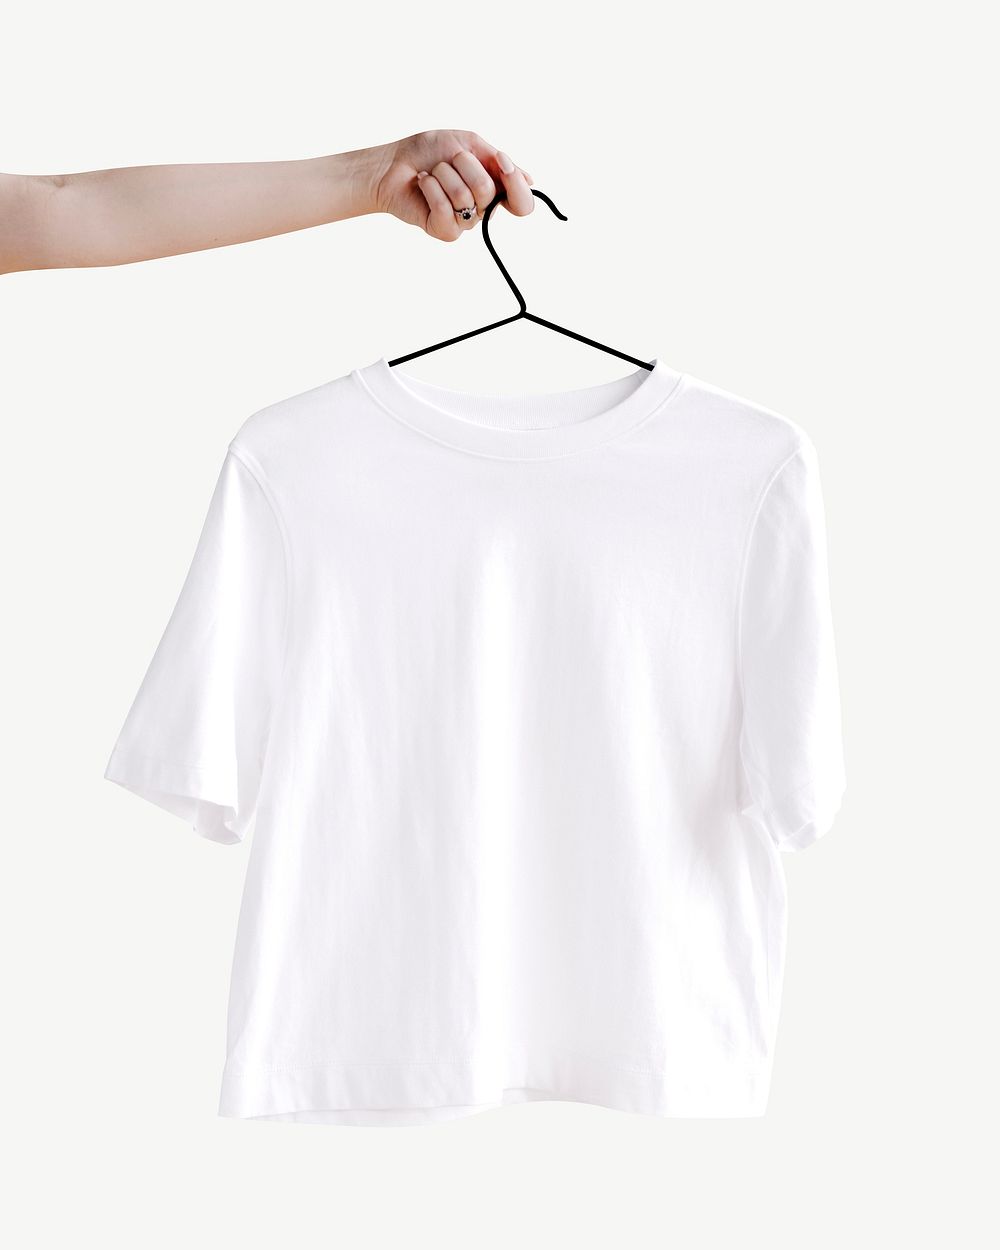 Blank white t-shirt collage element psd